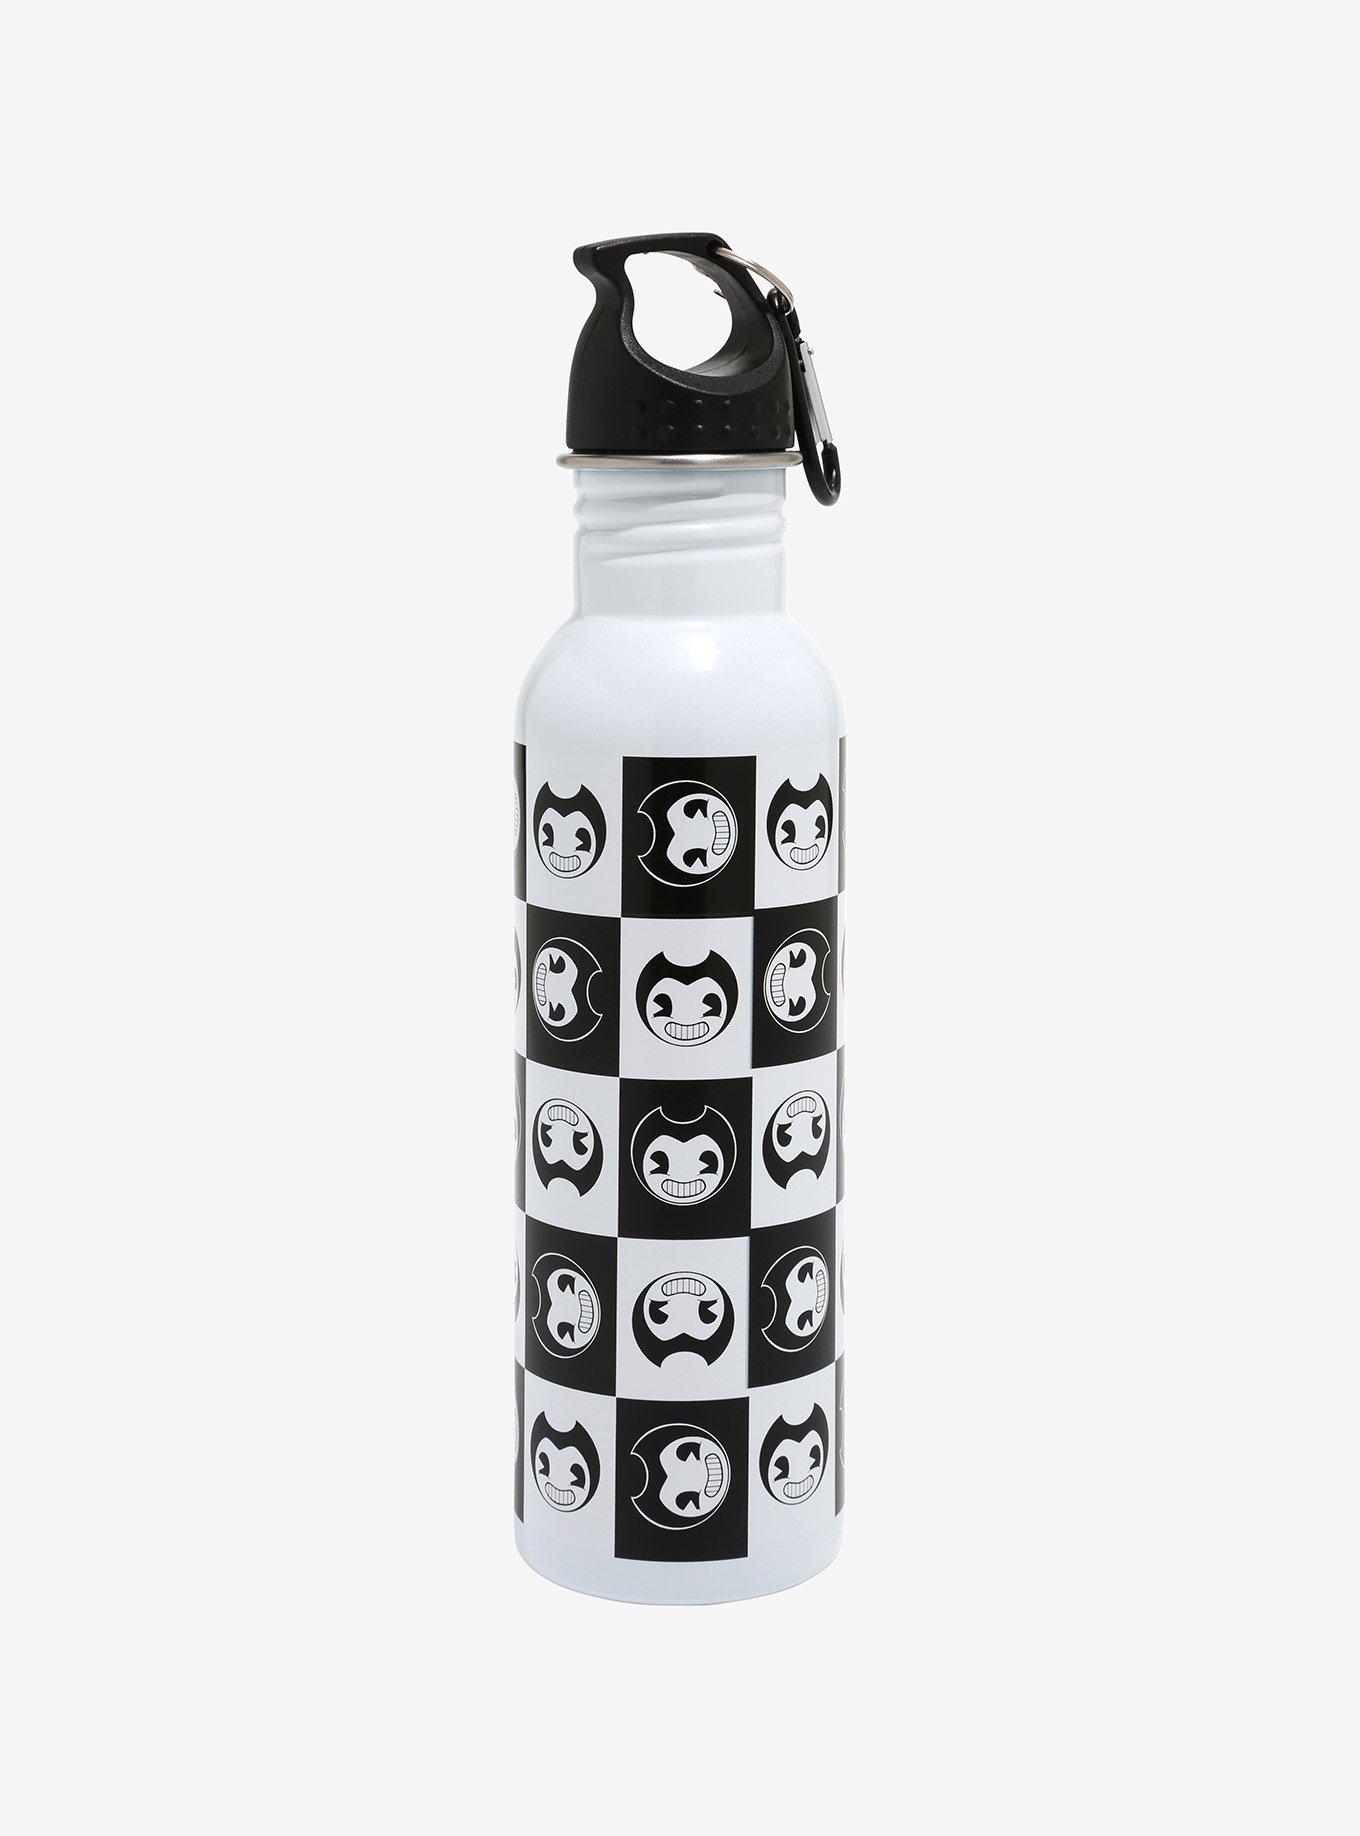 Hot Topic Disney Winnie The Pooh Stainless Steel Water Bottle